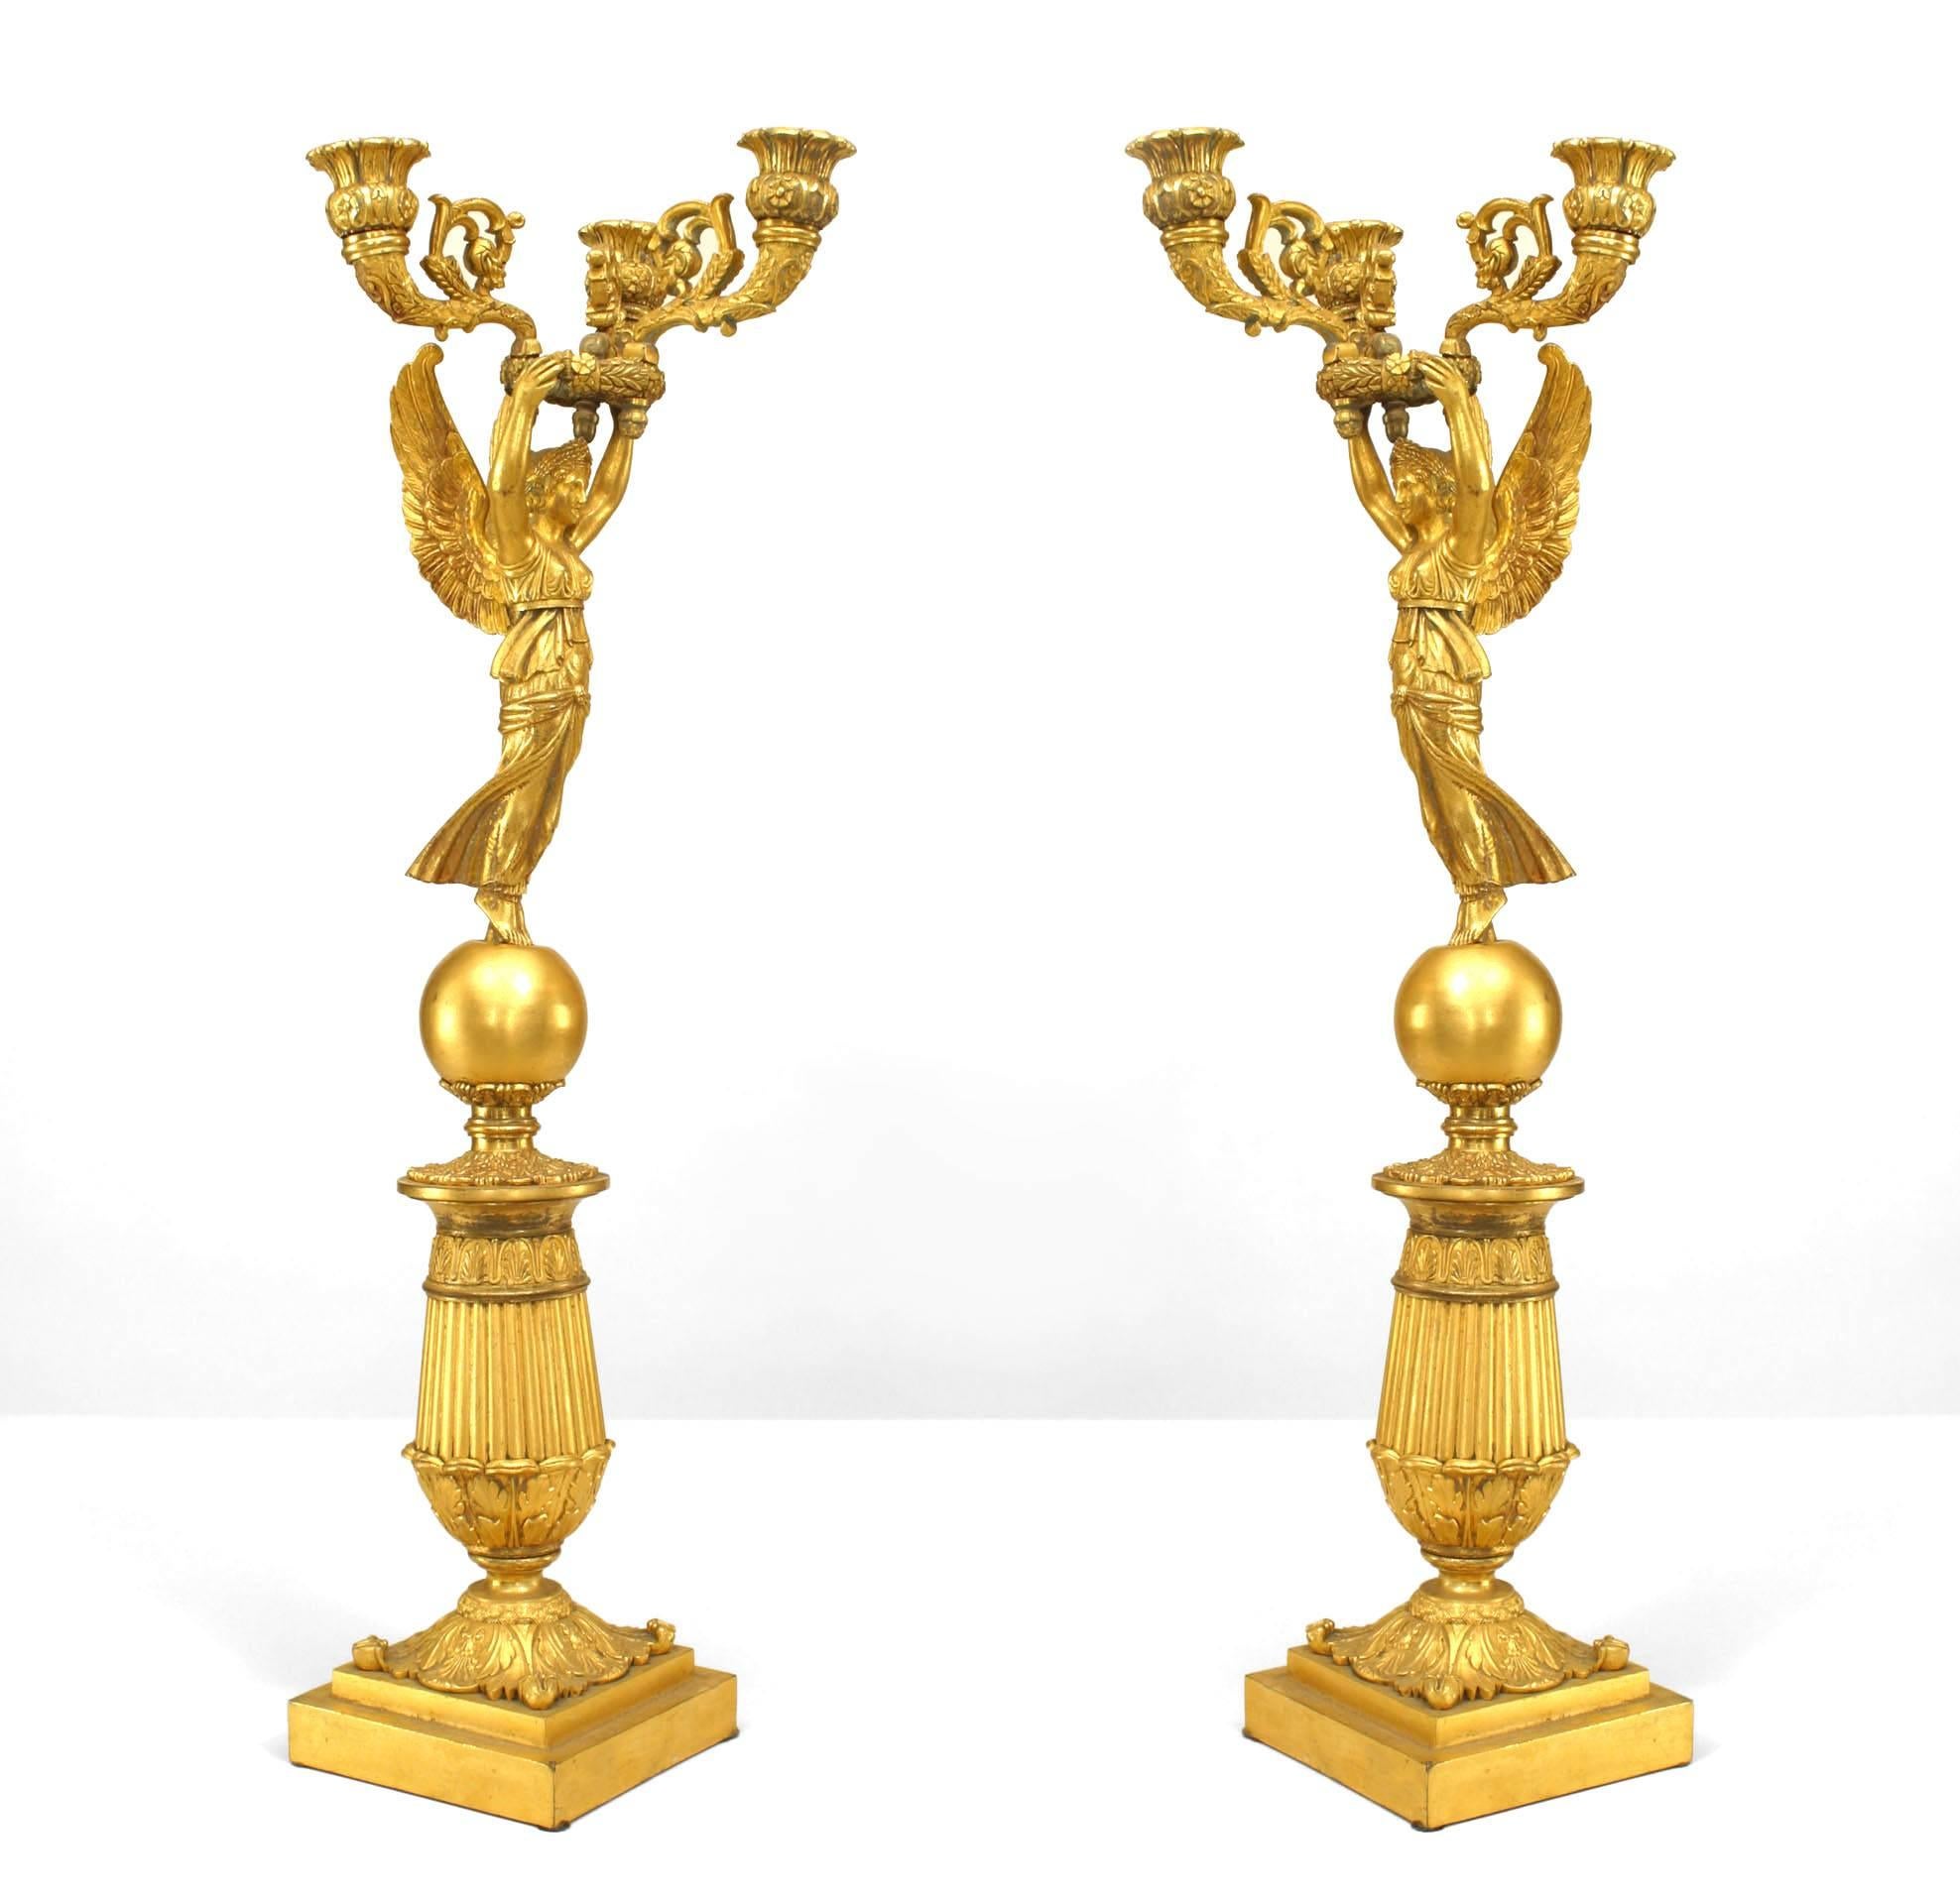 Pair of nineteenth century French Empire style bronze dore three arm candelabra, each featuring a classical winged victory or Nike figure positioned atop a tiered, architectural pedestal.